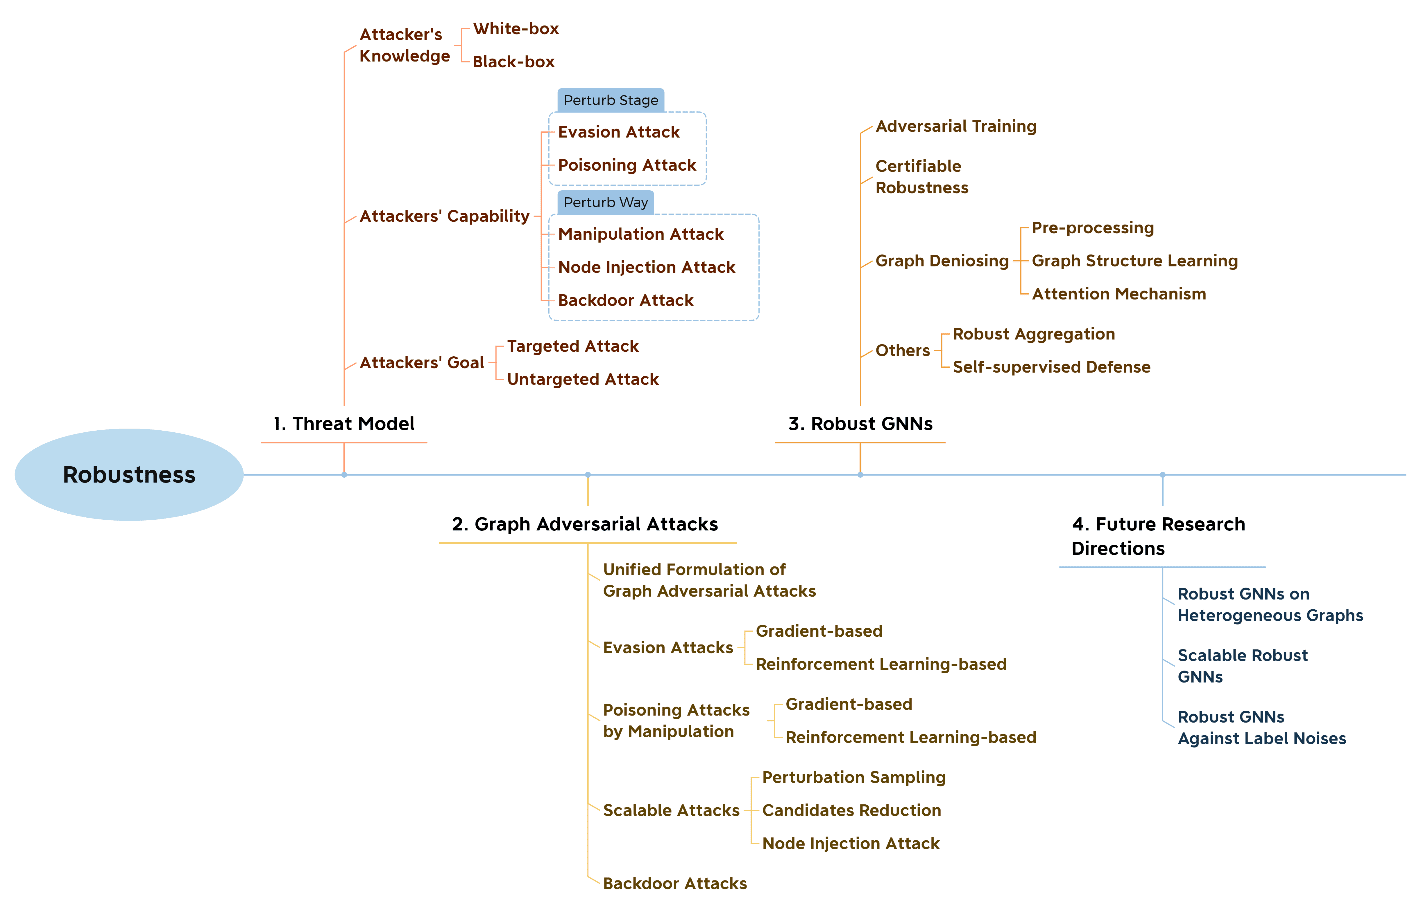 The organization of the robustness section (Sec.4) in the survey